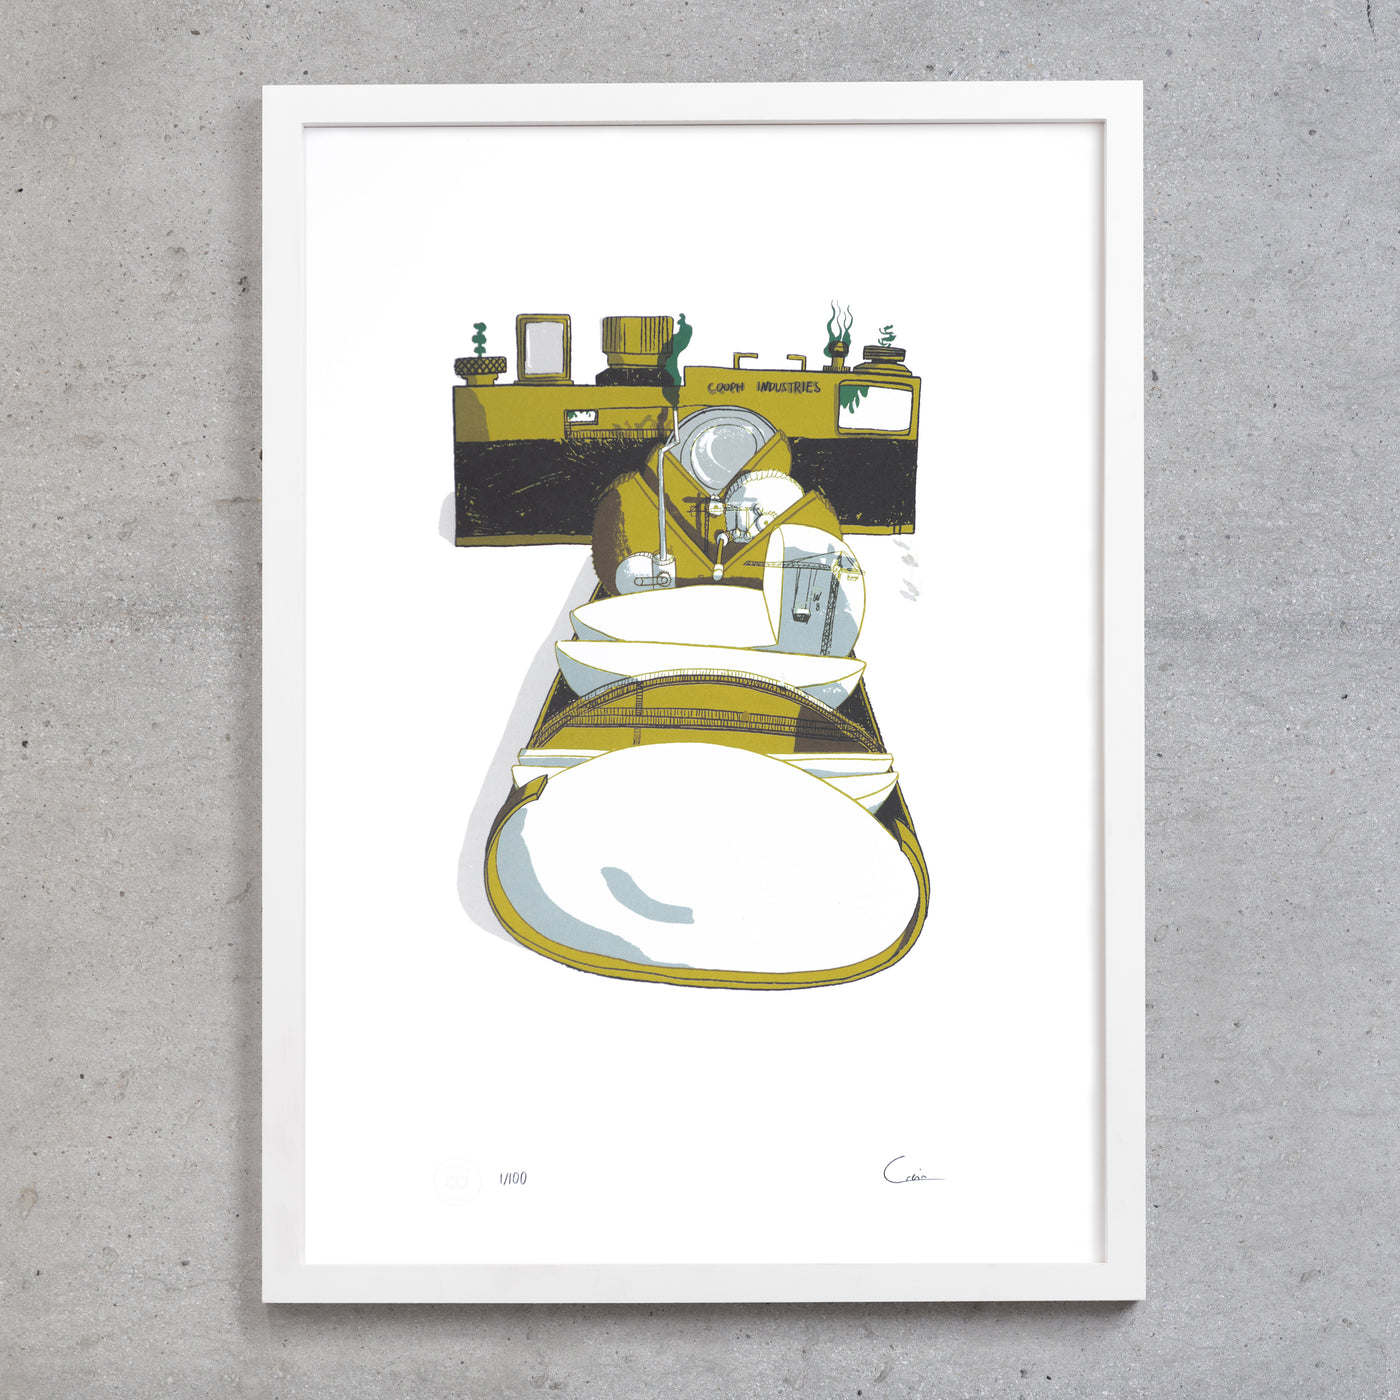 Art Print FACTORY by Julian Grein - Limited Edition